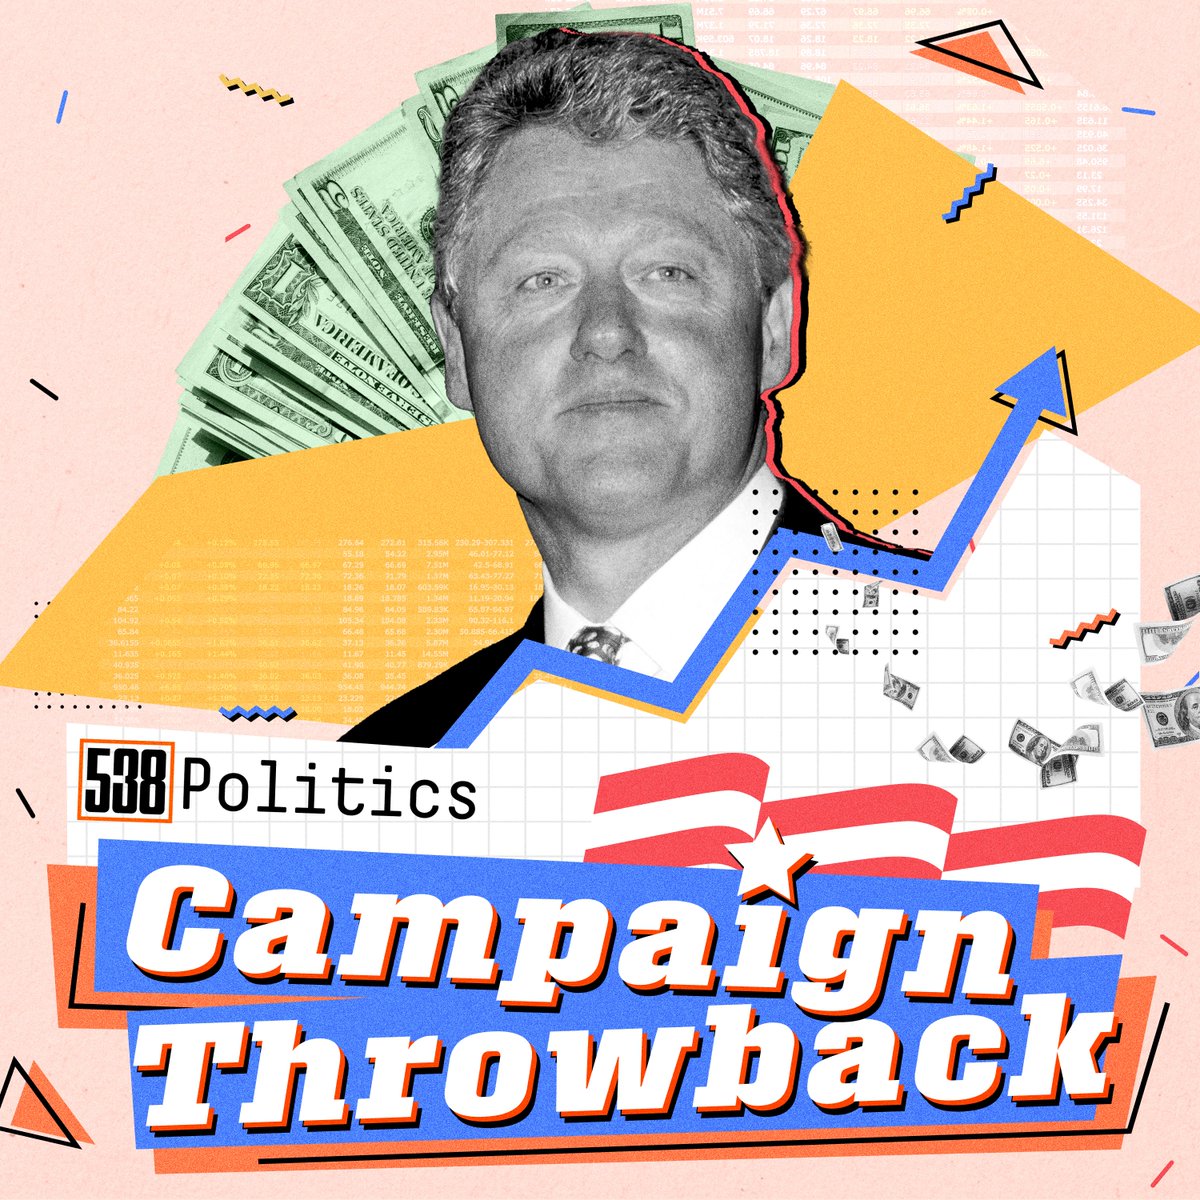 Today we're launching the 'Campaign Throwback' series on the 538 Politics podcast! We're looking back at campaign tropes from past elections & asking where they came from, if they were true then & true now In the first episode: 'It's the economy, stupid' podcasts.apple.com/us/podcast/fiv…